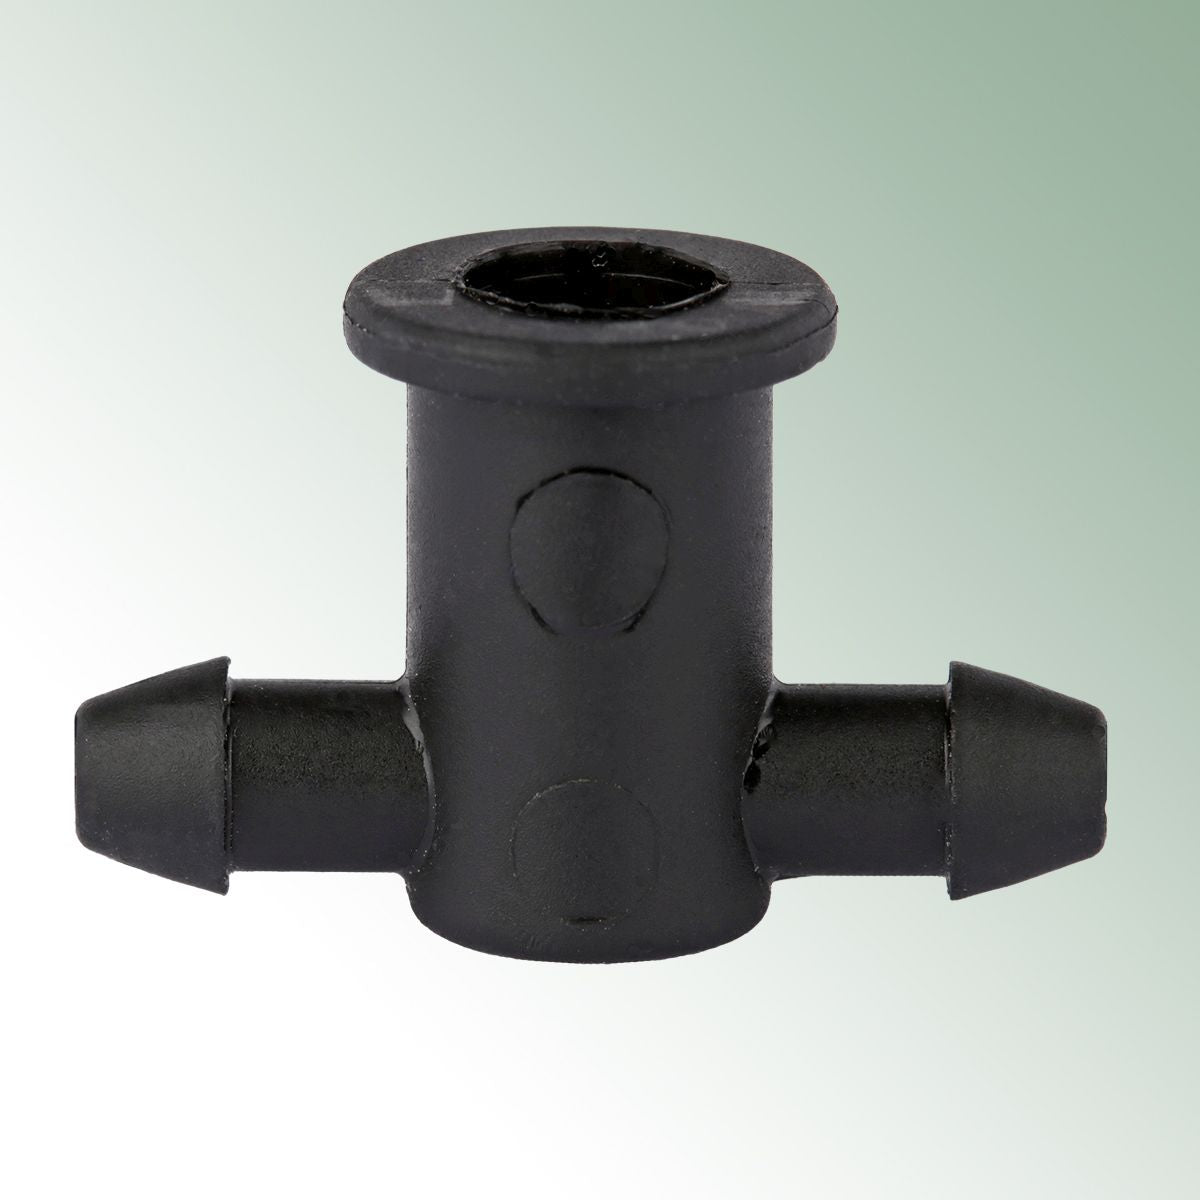 2-way Connector for Drippers with Nipple Fitting Sold individ./Pack= 100 pcs.